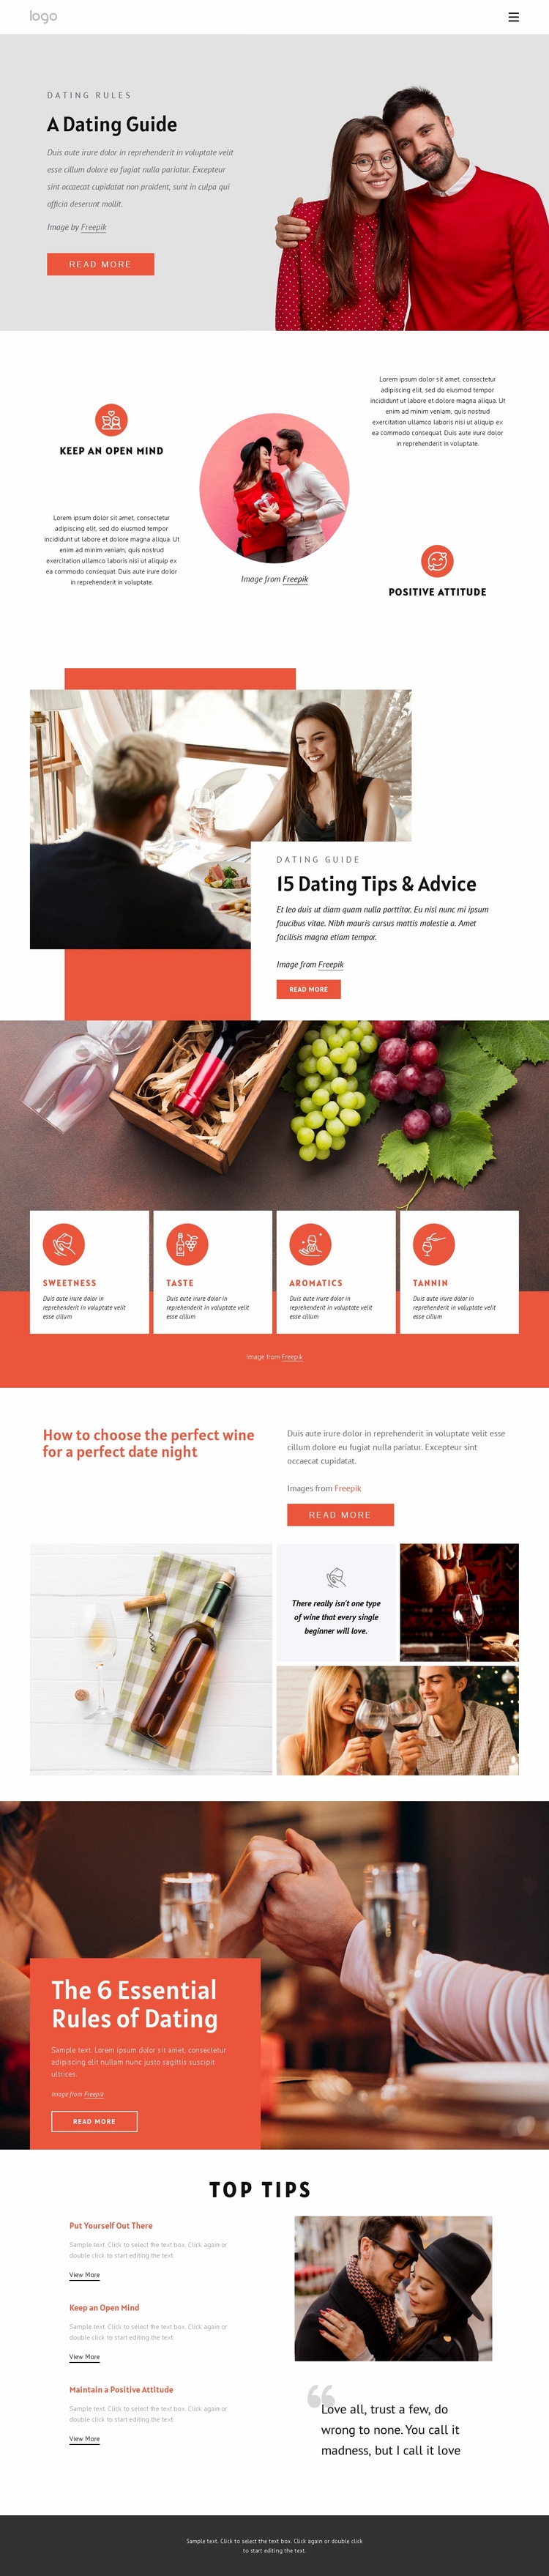 Dating guide Wix Template Alternative